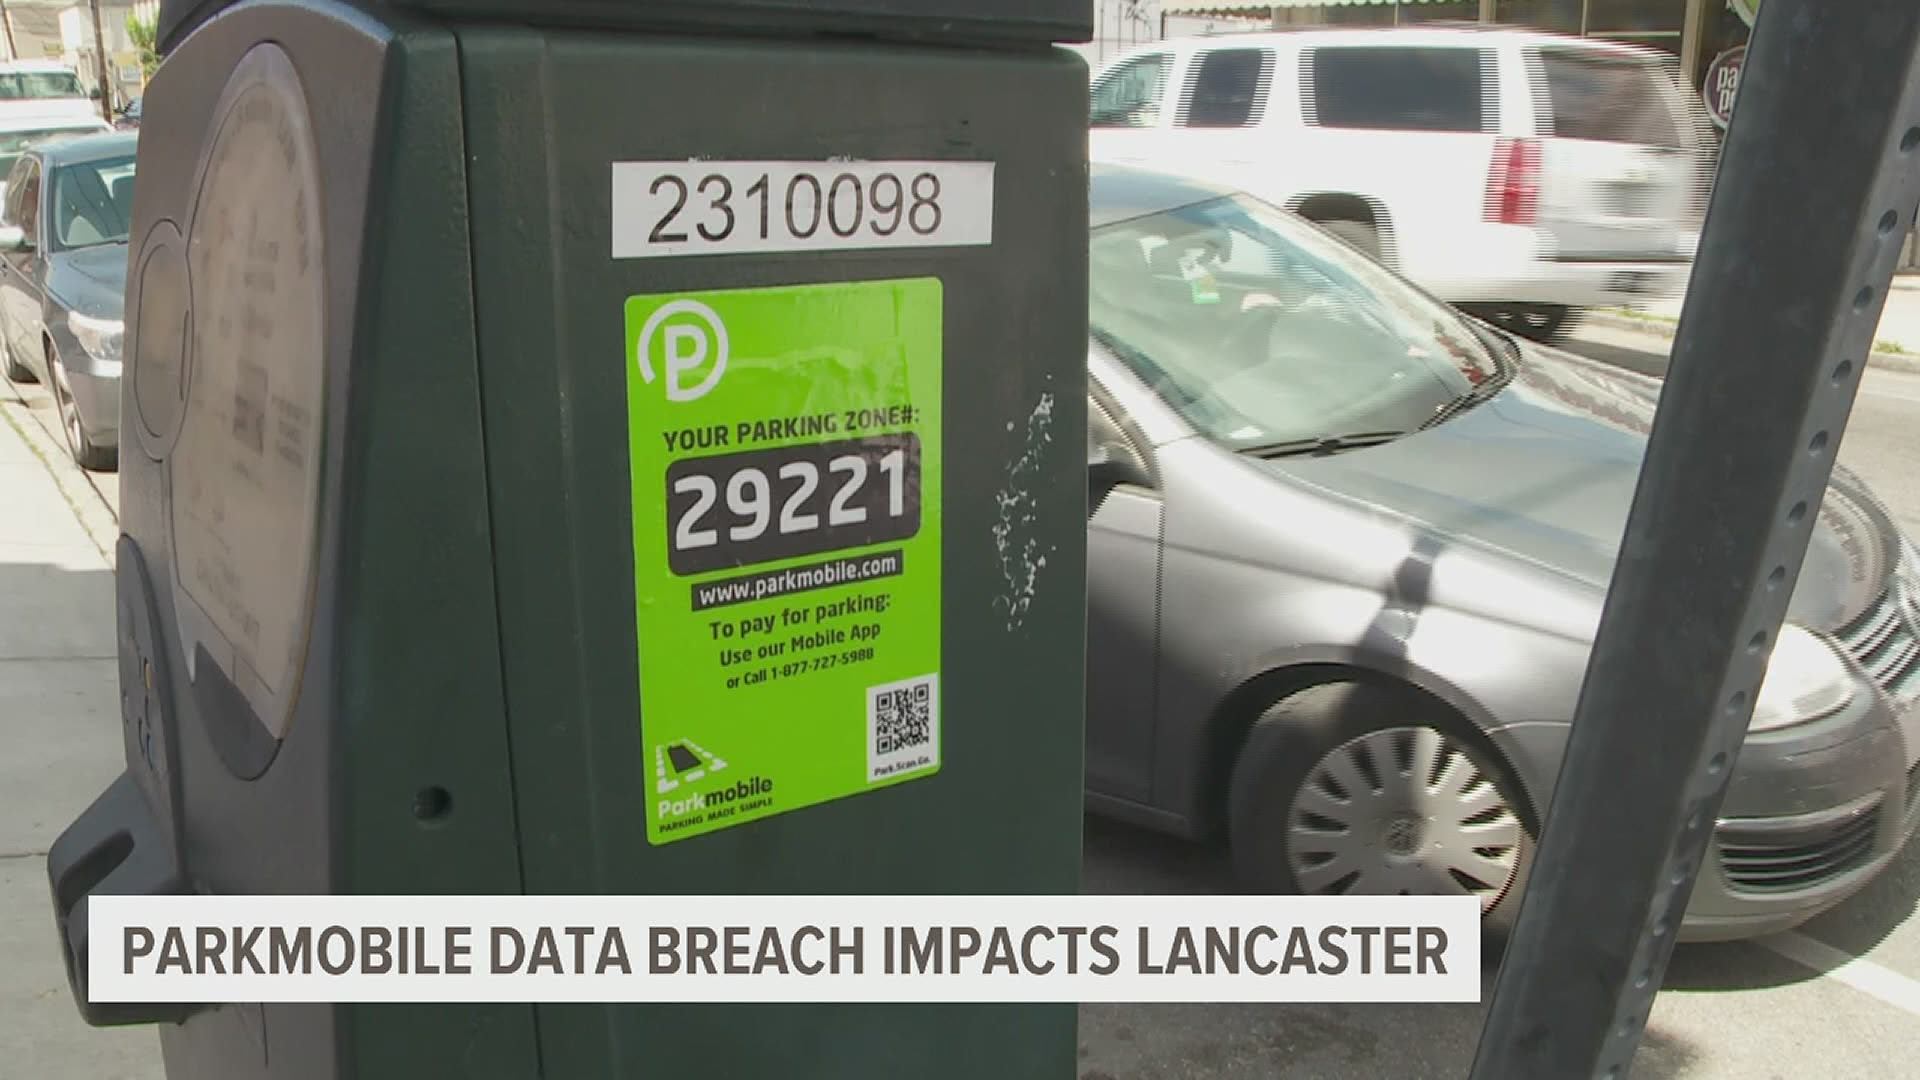 ParkMobile makes things easier for users to pay and find parking. However, if you've used the app to pay for parking in Lancaster, your data may have been stolen.